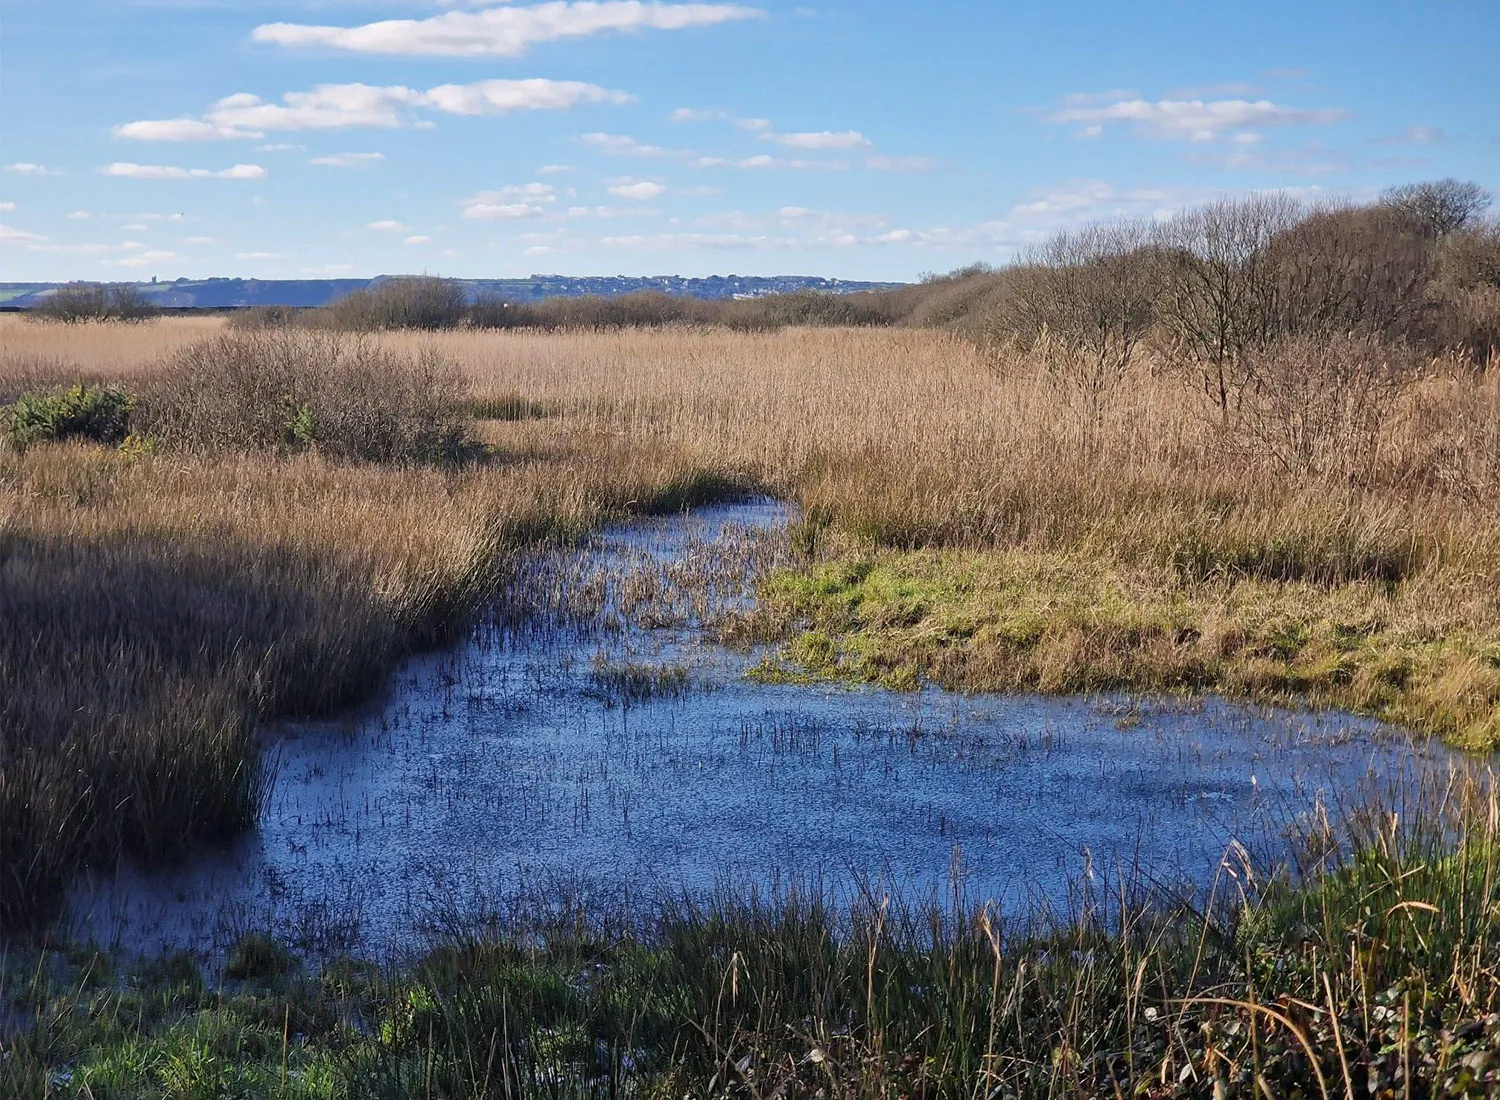 A winters view of the reeds at Marazion Marsh